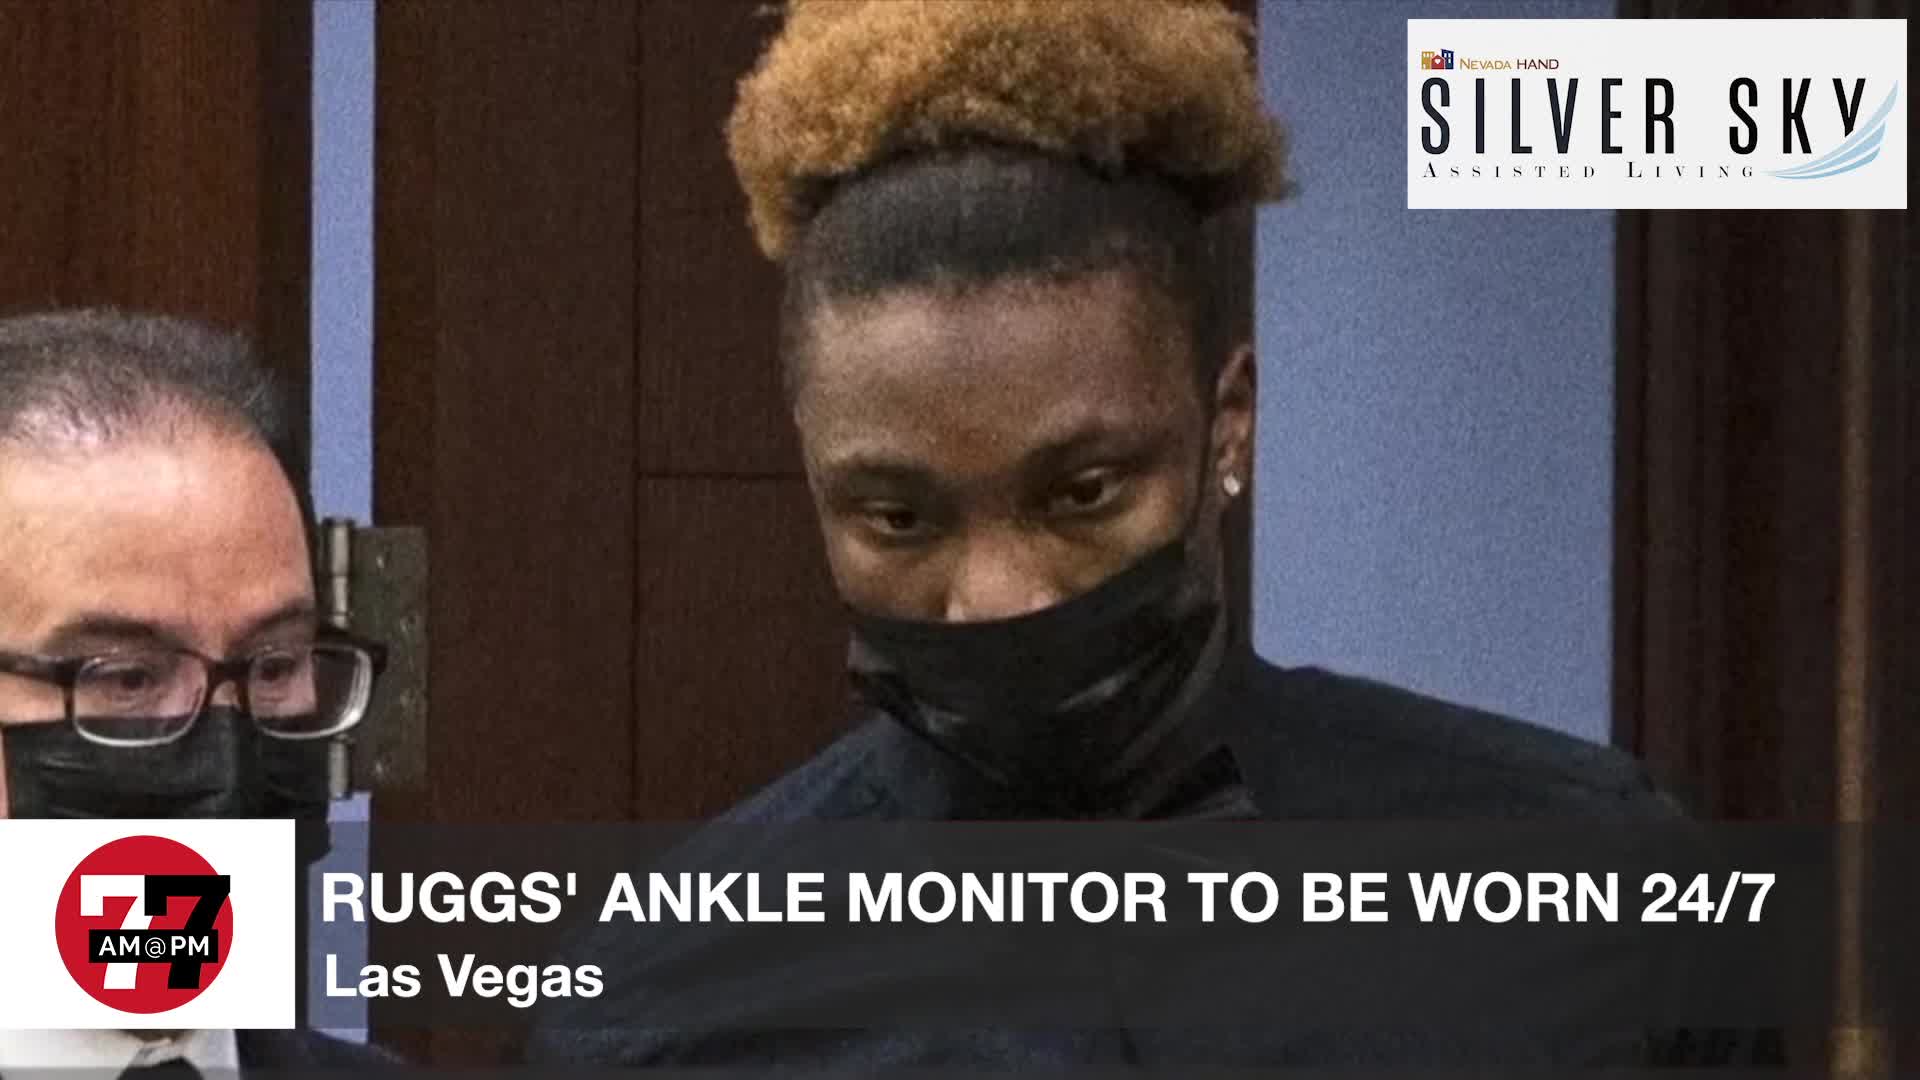 7@7PM Ruggs’ Ankle Monitor to be Worn 24/7